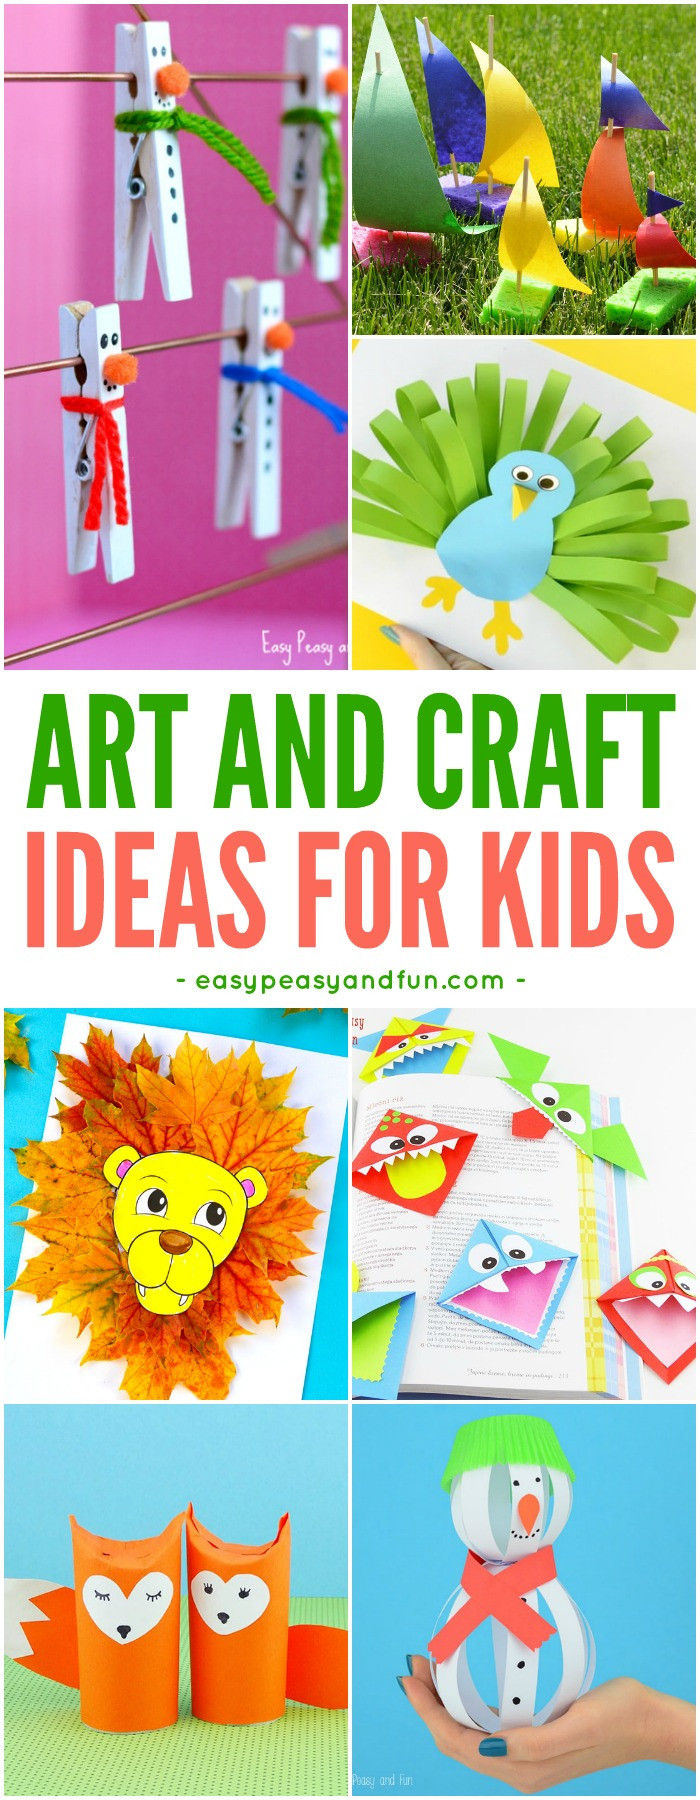 Preschoolers Arts And Crafts
 Crafts For Kids Tons of Art and Craft Ideas for Kids to